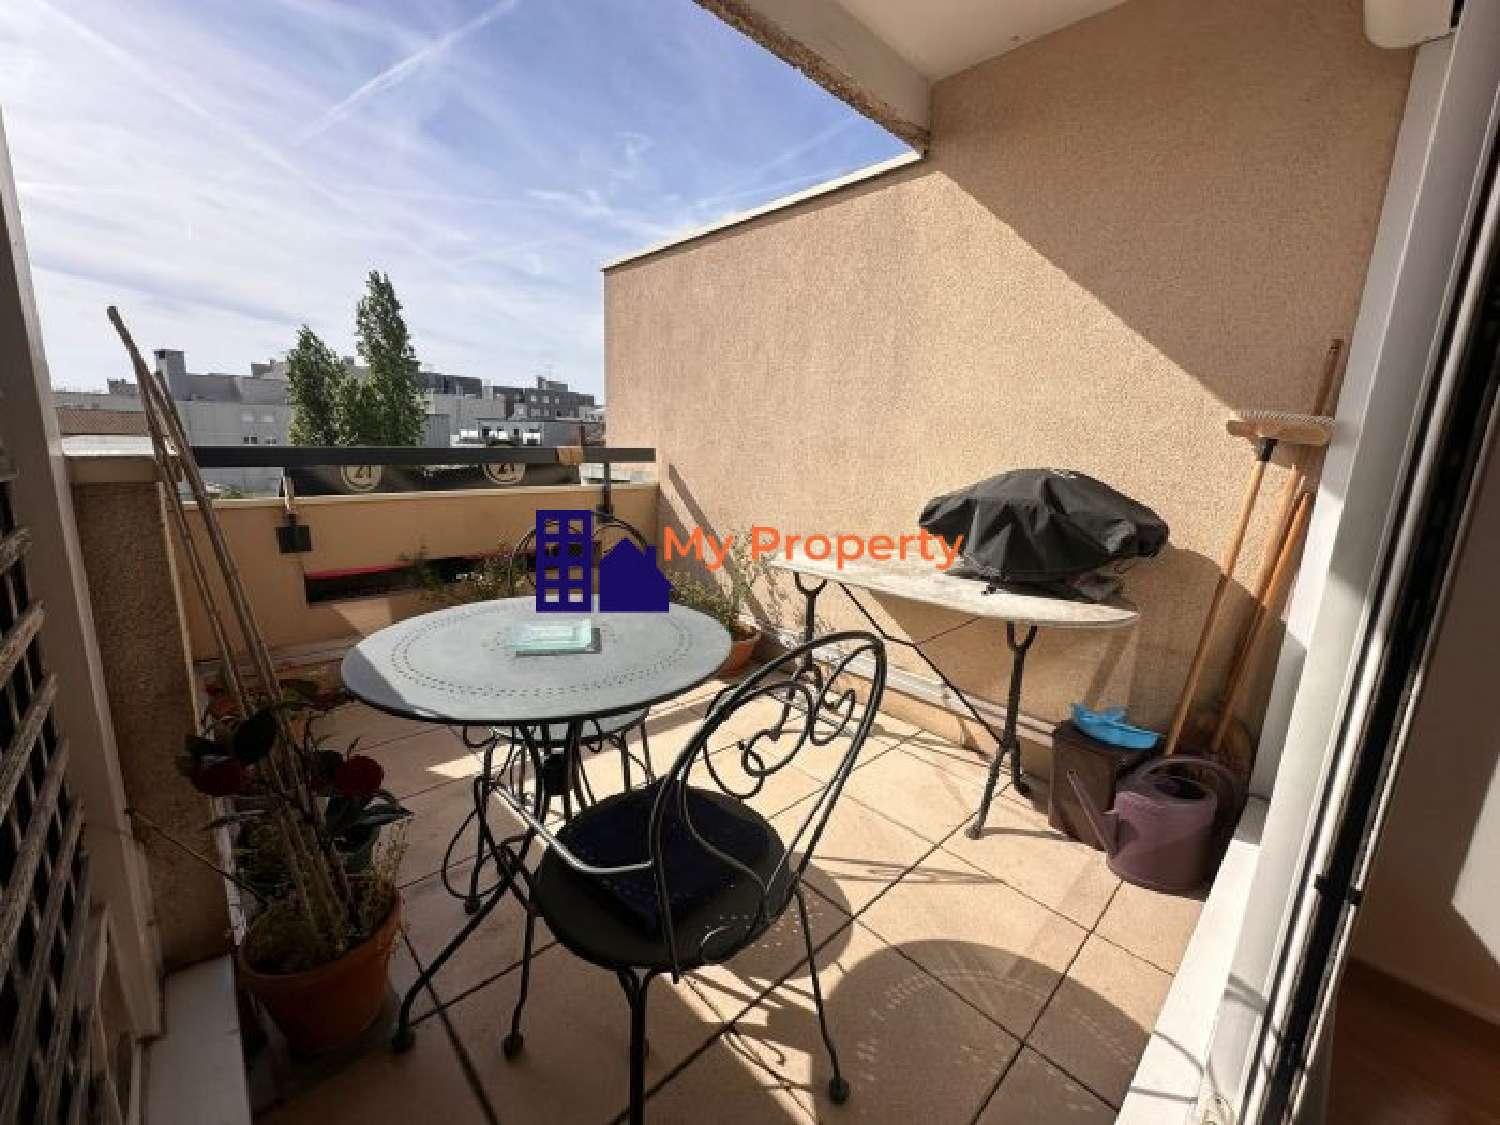  for sale apartment Houilles Yvelines 5